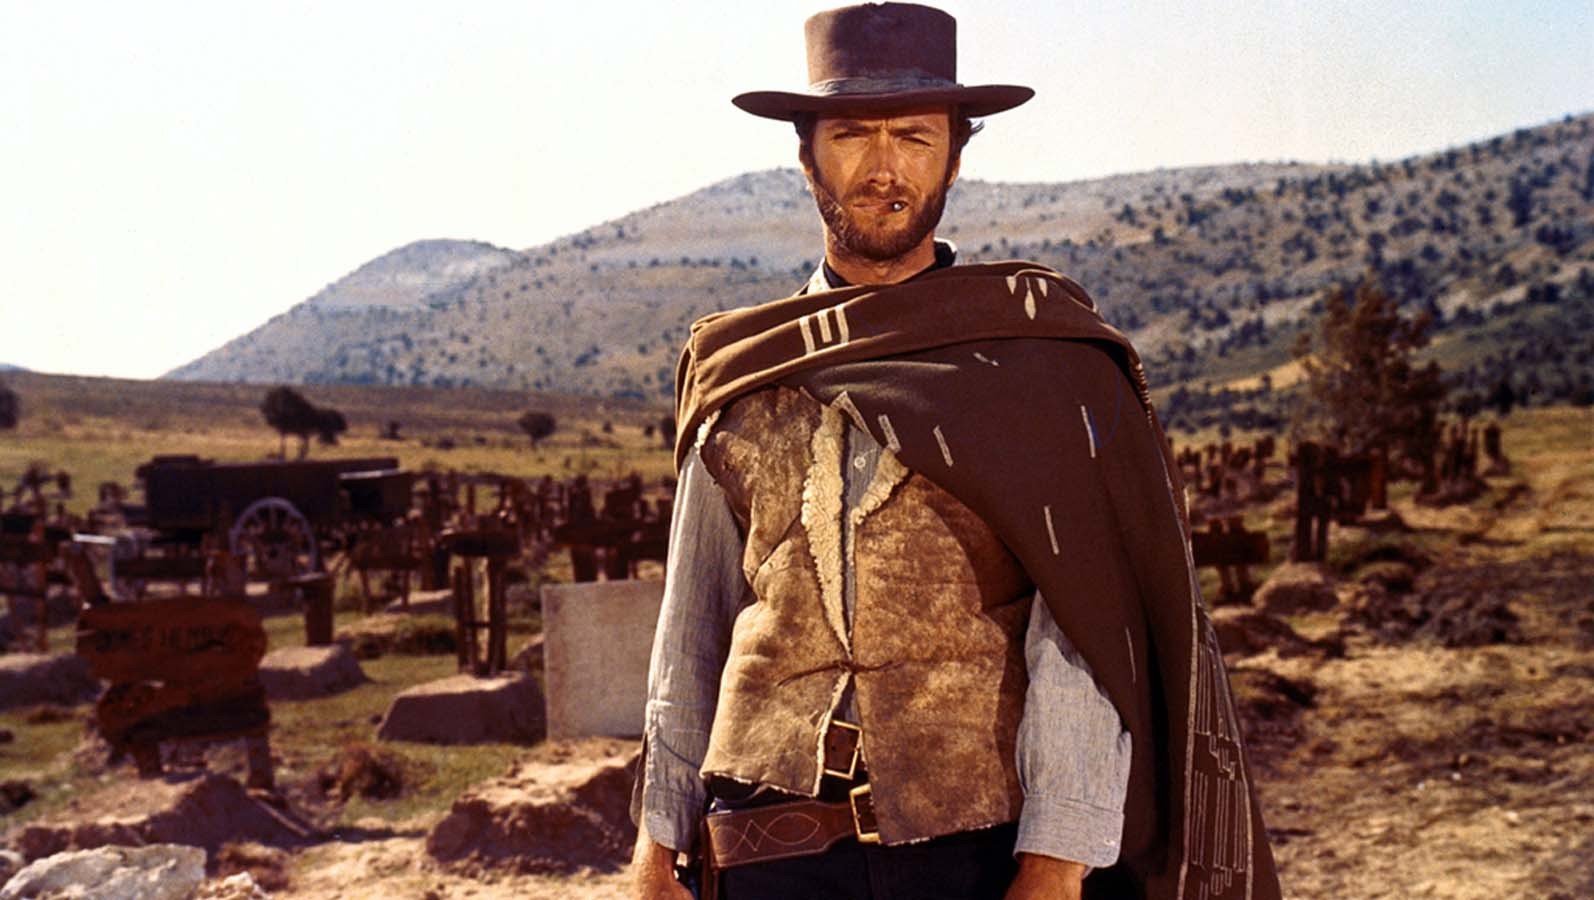 People 1594x900 movies The Good  The Bad and The Ugly Clint Eastwood western movie characters film stills cowboys cowboy hats actor ponchos men